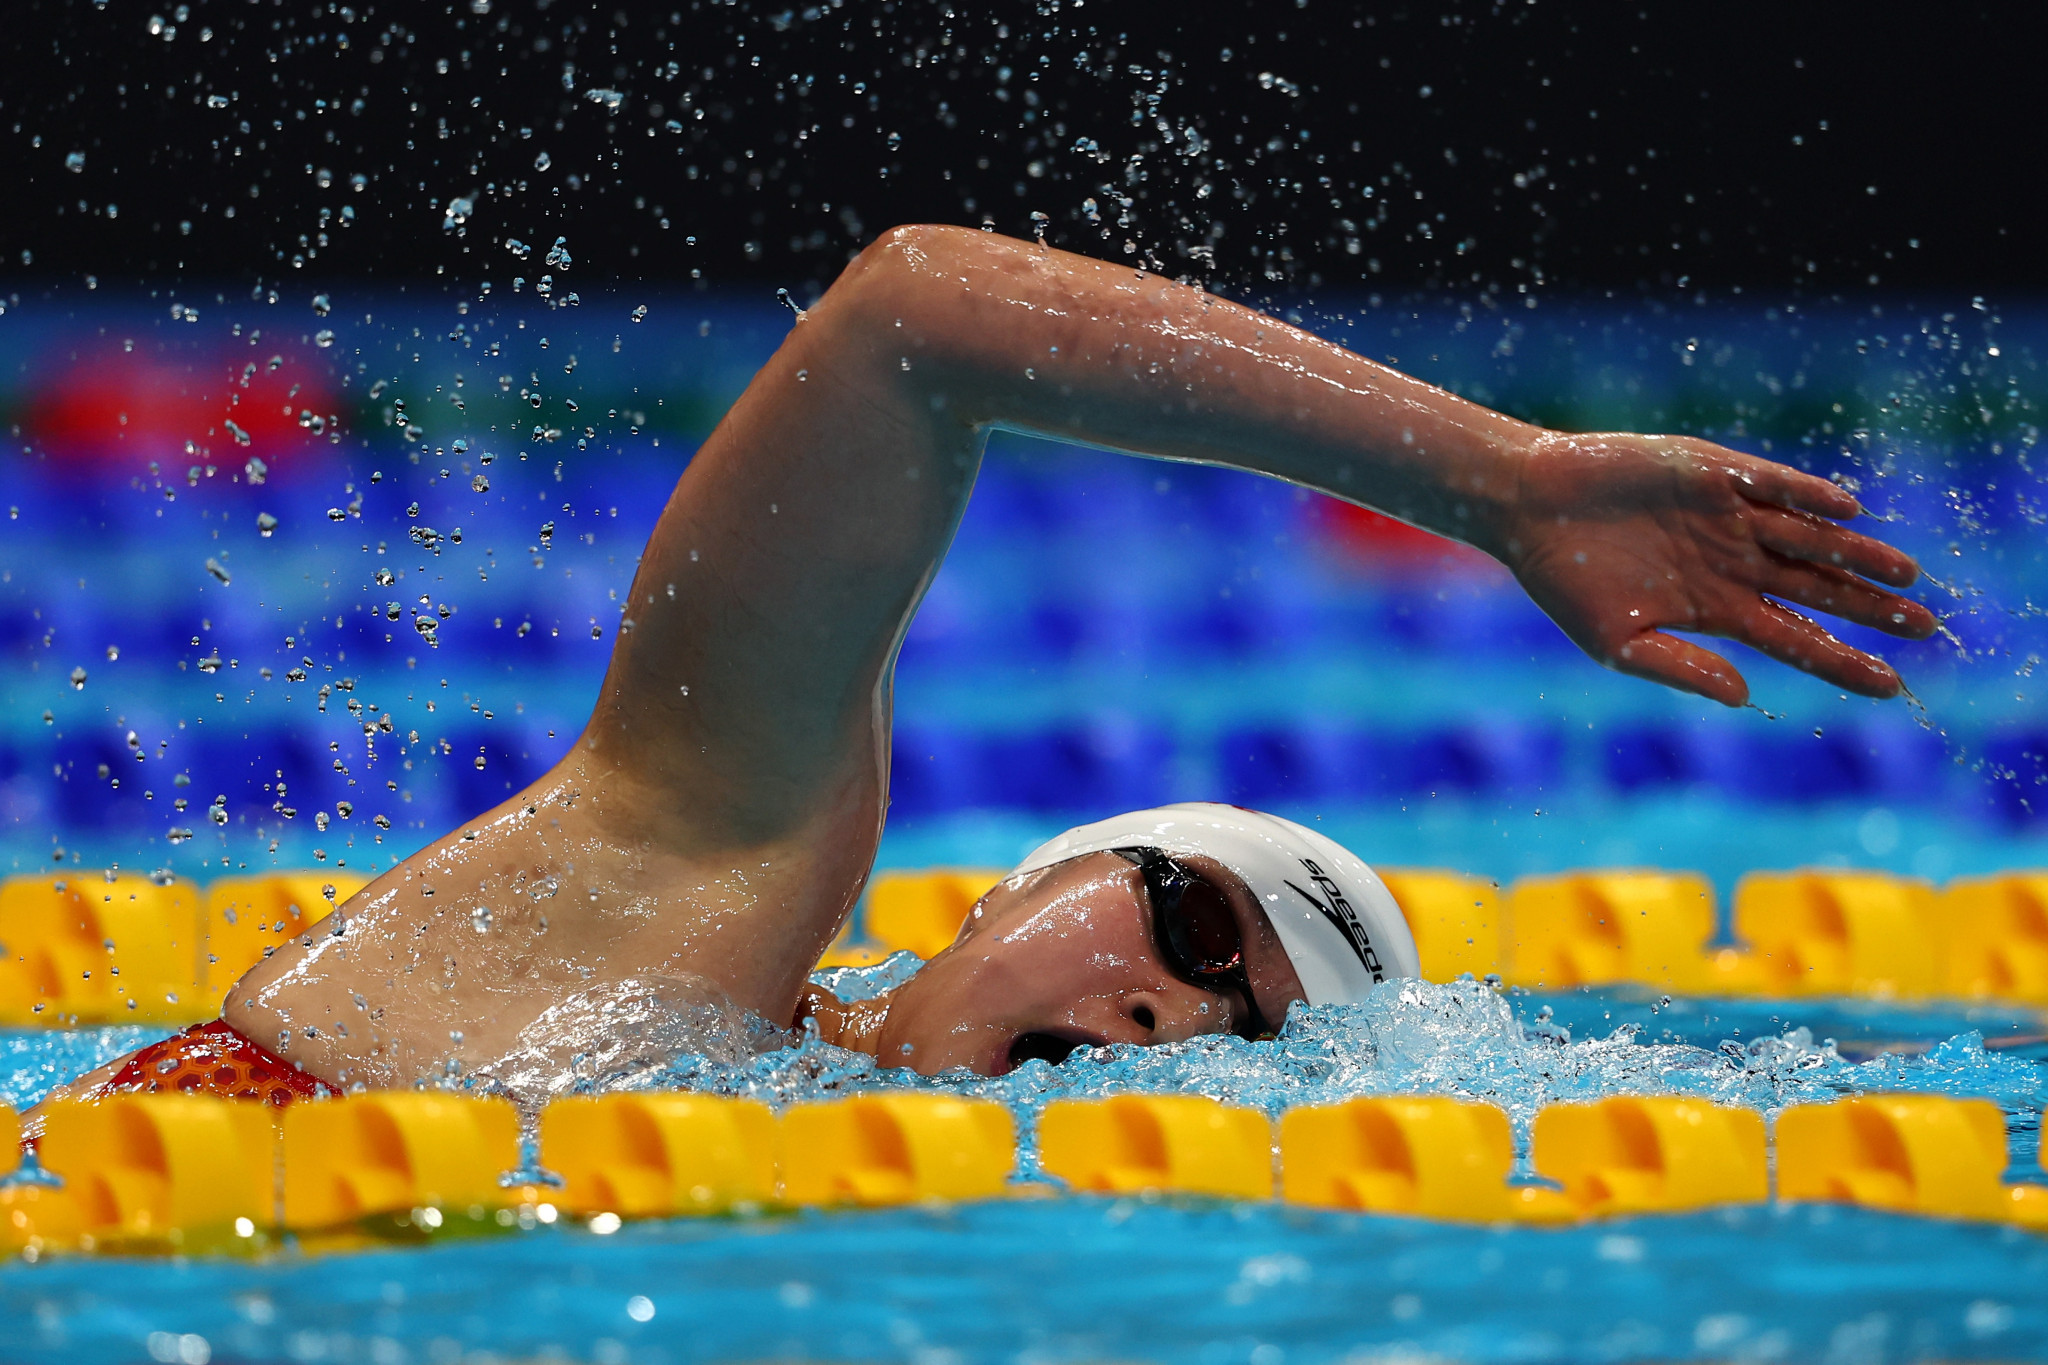 Li Bingjie of China swept to victory in the women’s 400m freestyle final ©Getty Images